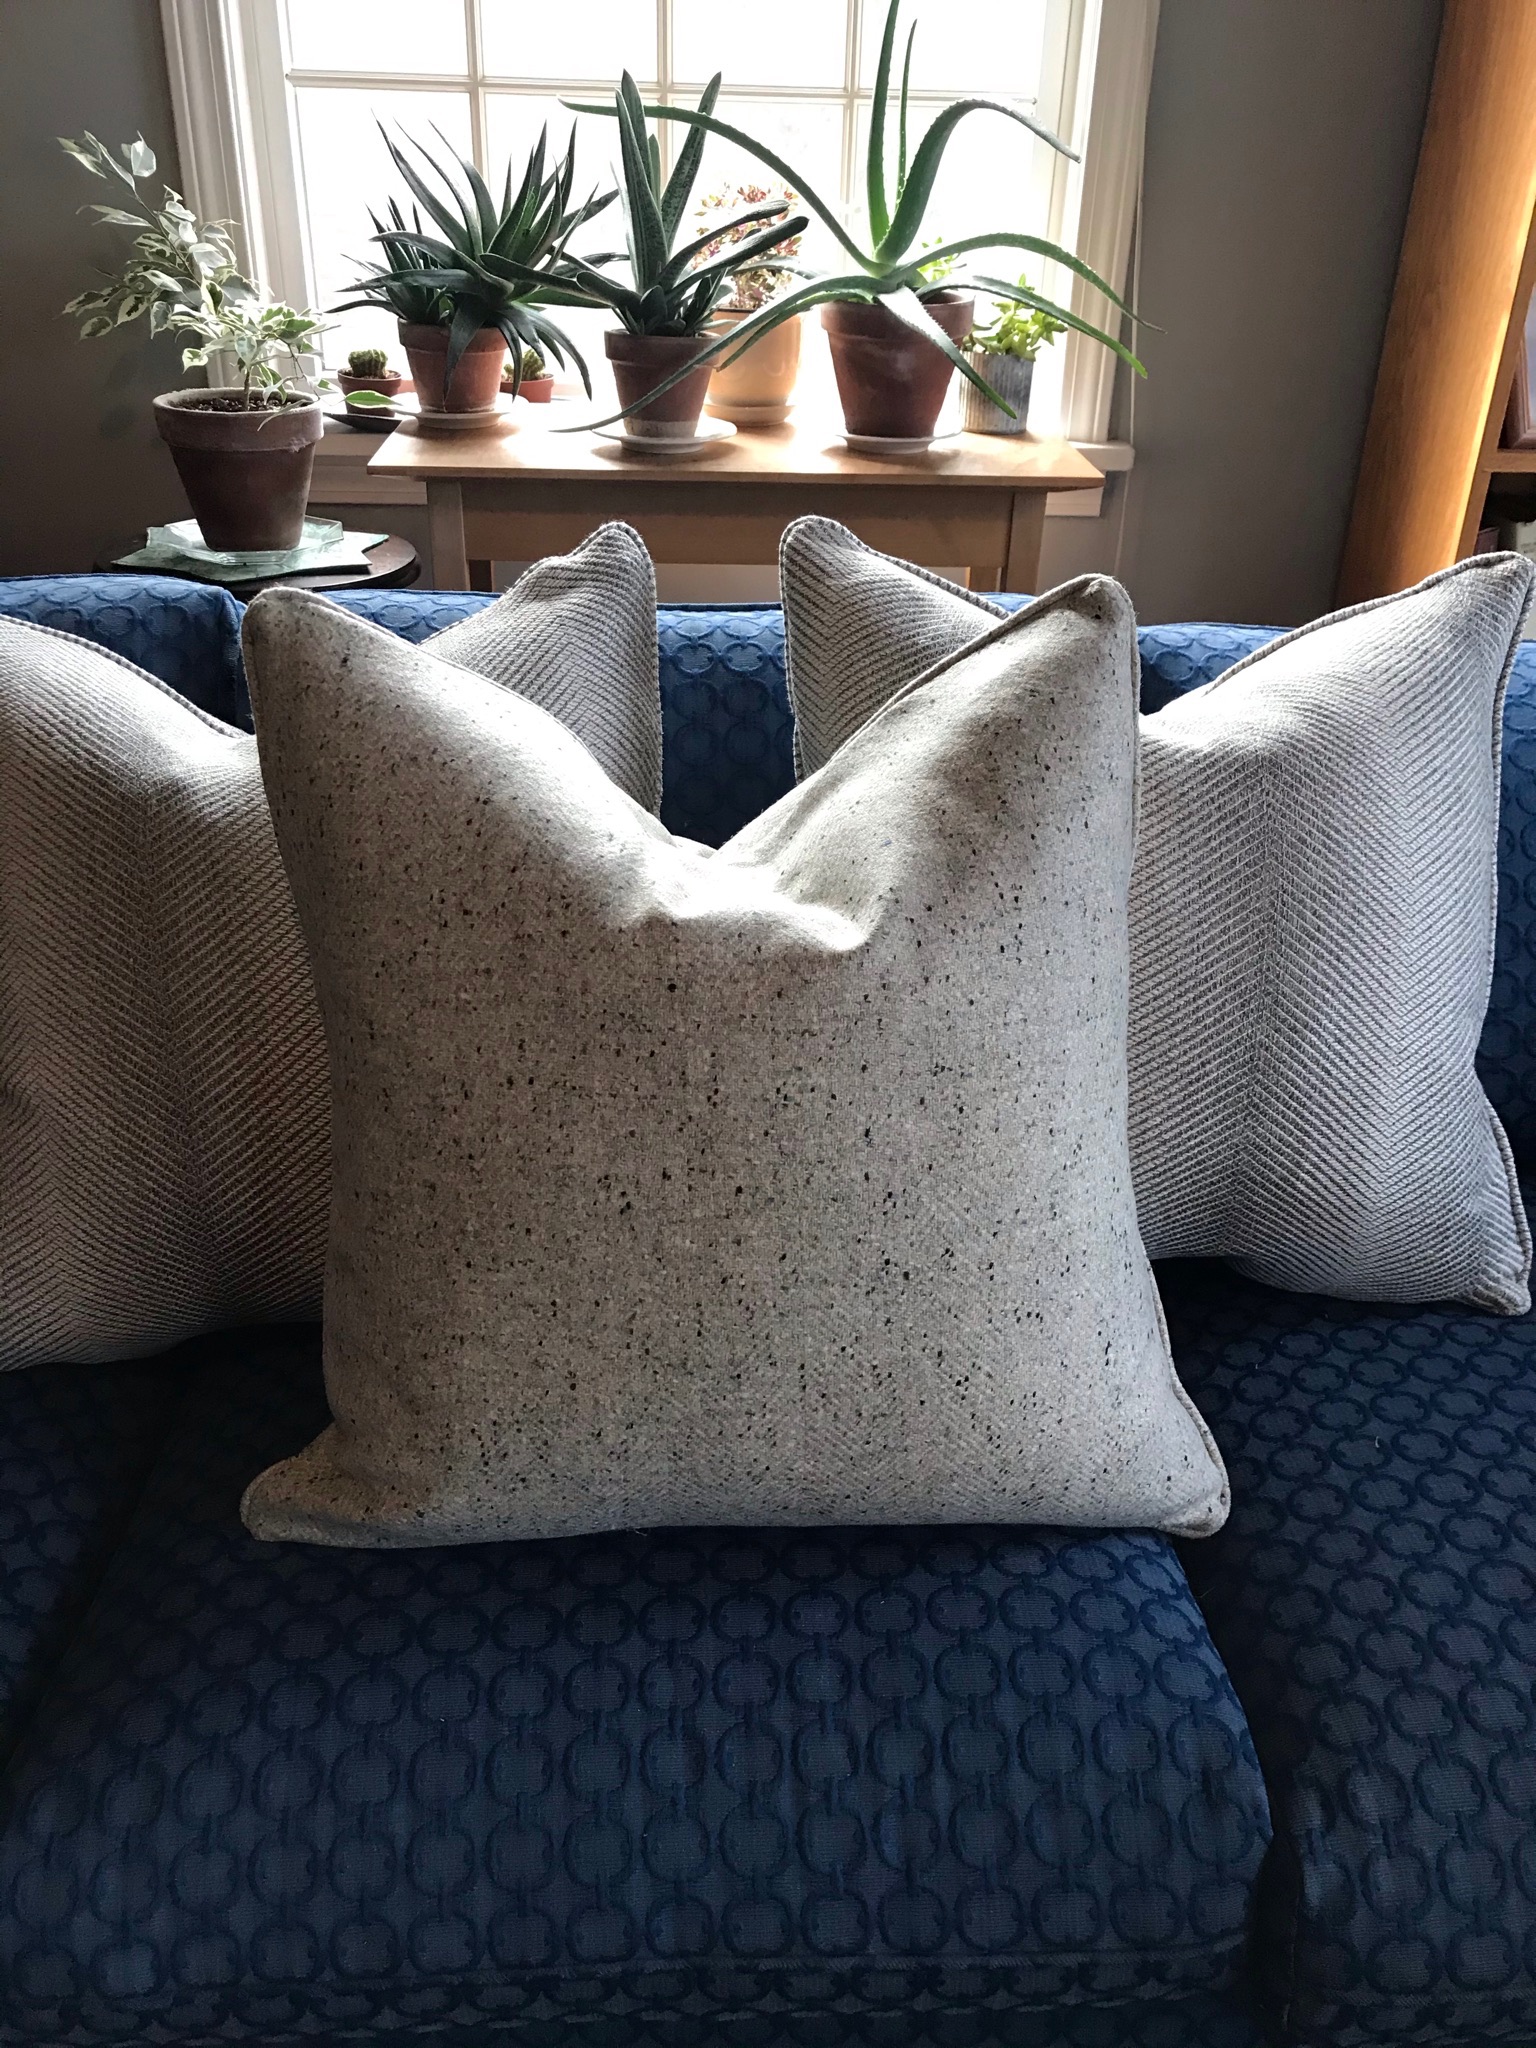 Group of Pillows